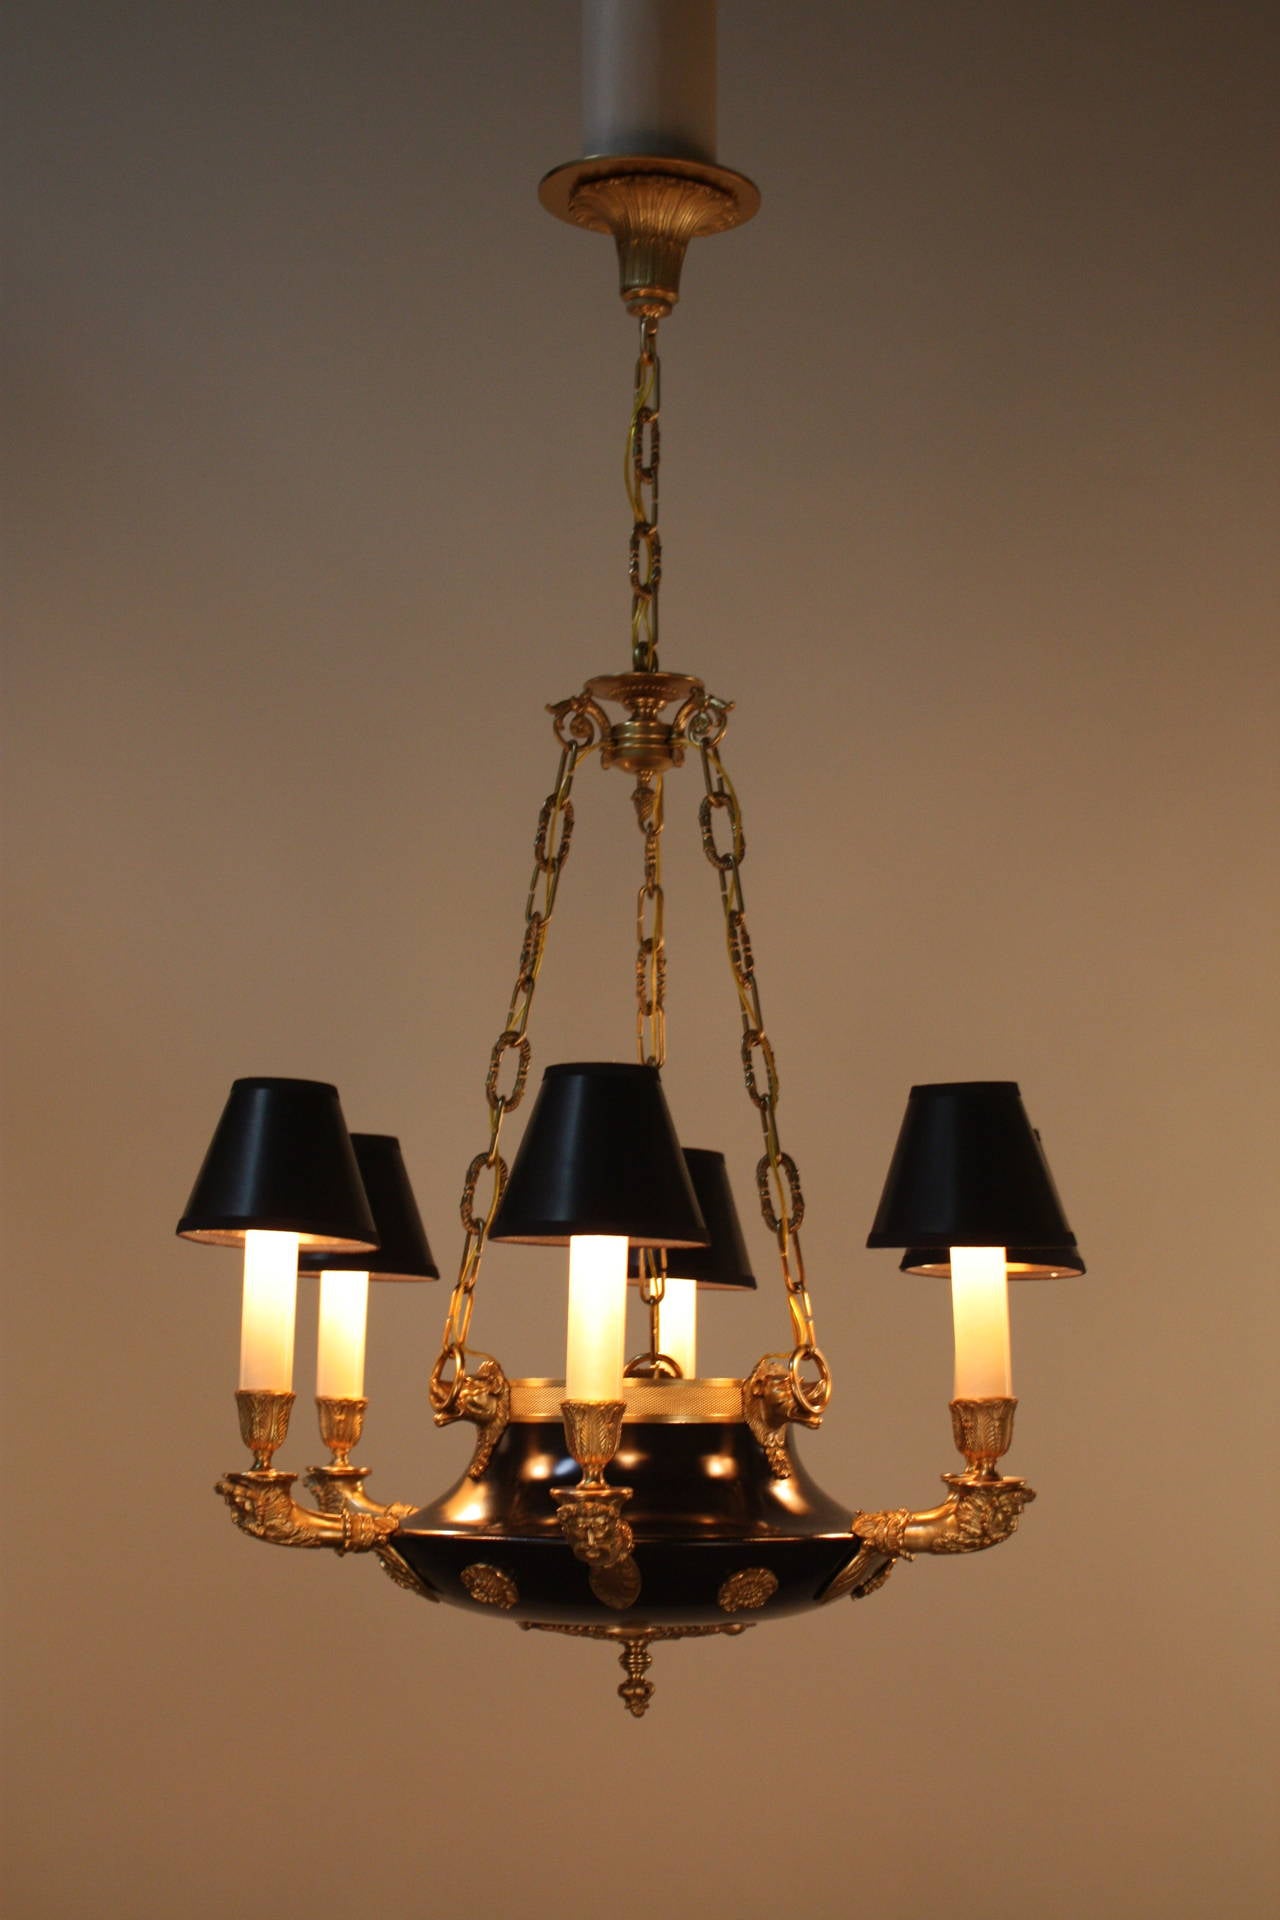 A fabulous six light Empire chandelier. Originally crafted in France during the early 20th century, this chandelier is made of beautiful bronze and black lacquer. A truly timeless piece, this hand crafted fixture is filled top to bottom with ornate